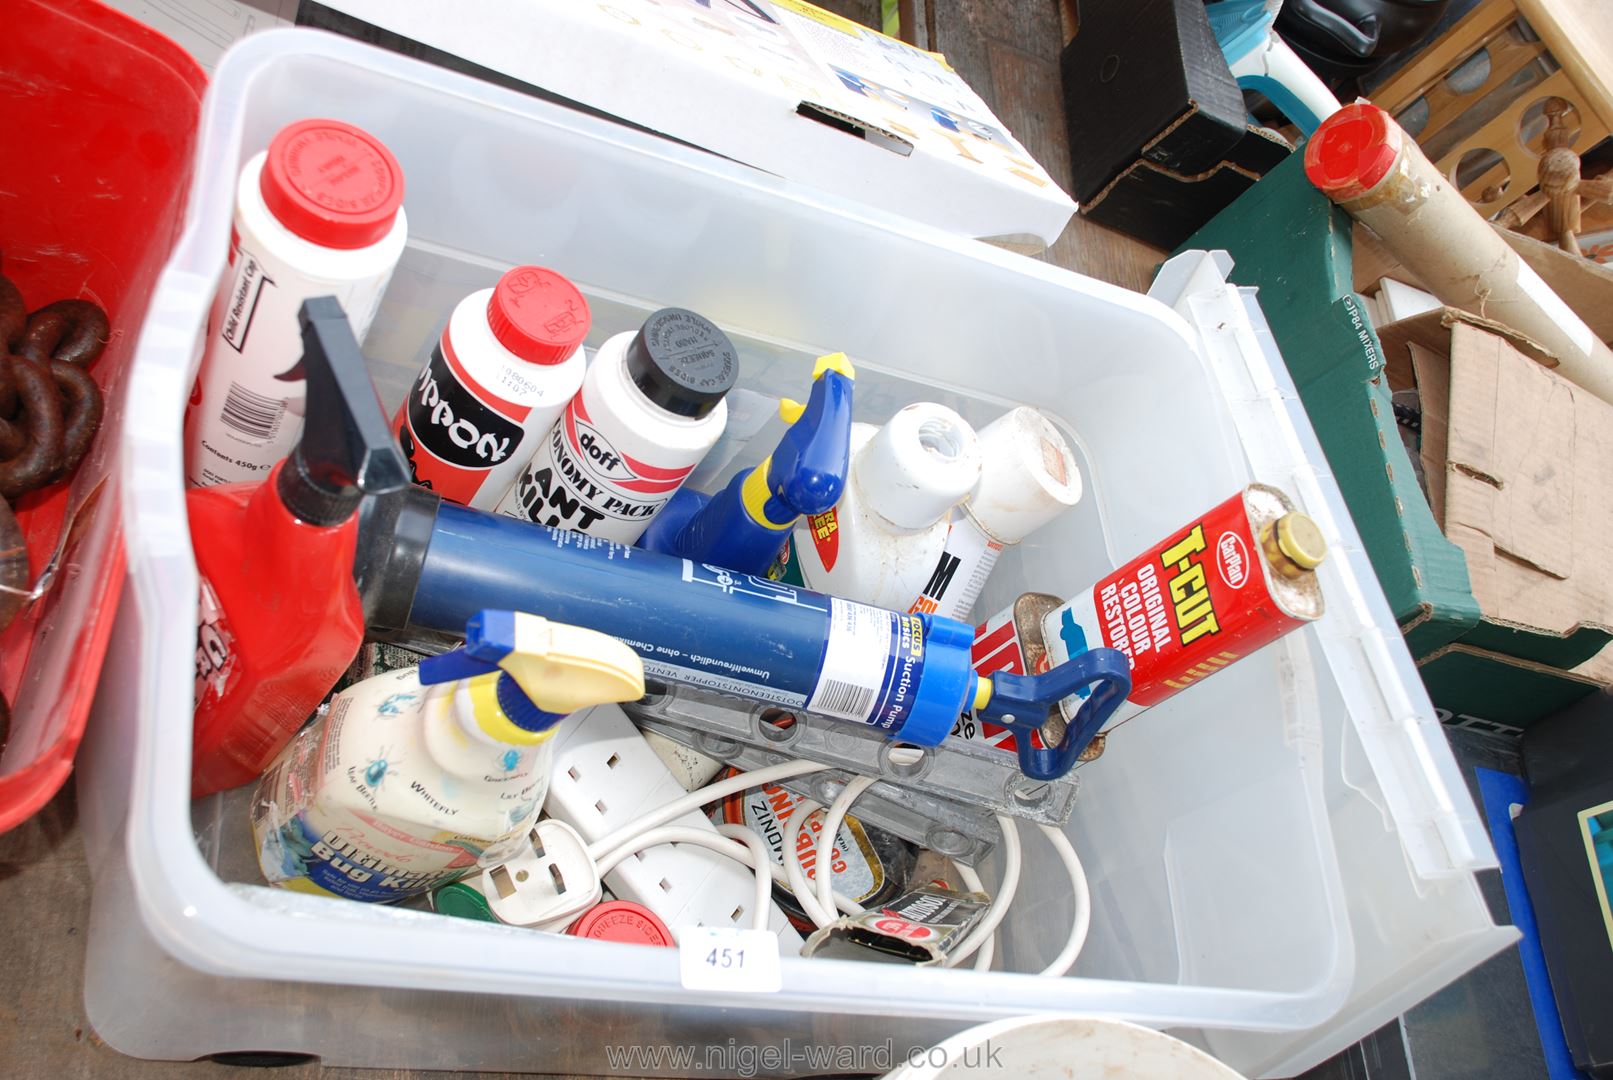 Crate of various garden sprays, T cut, car cleaning etc.